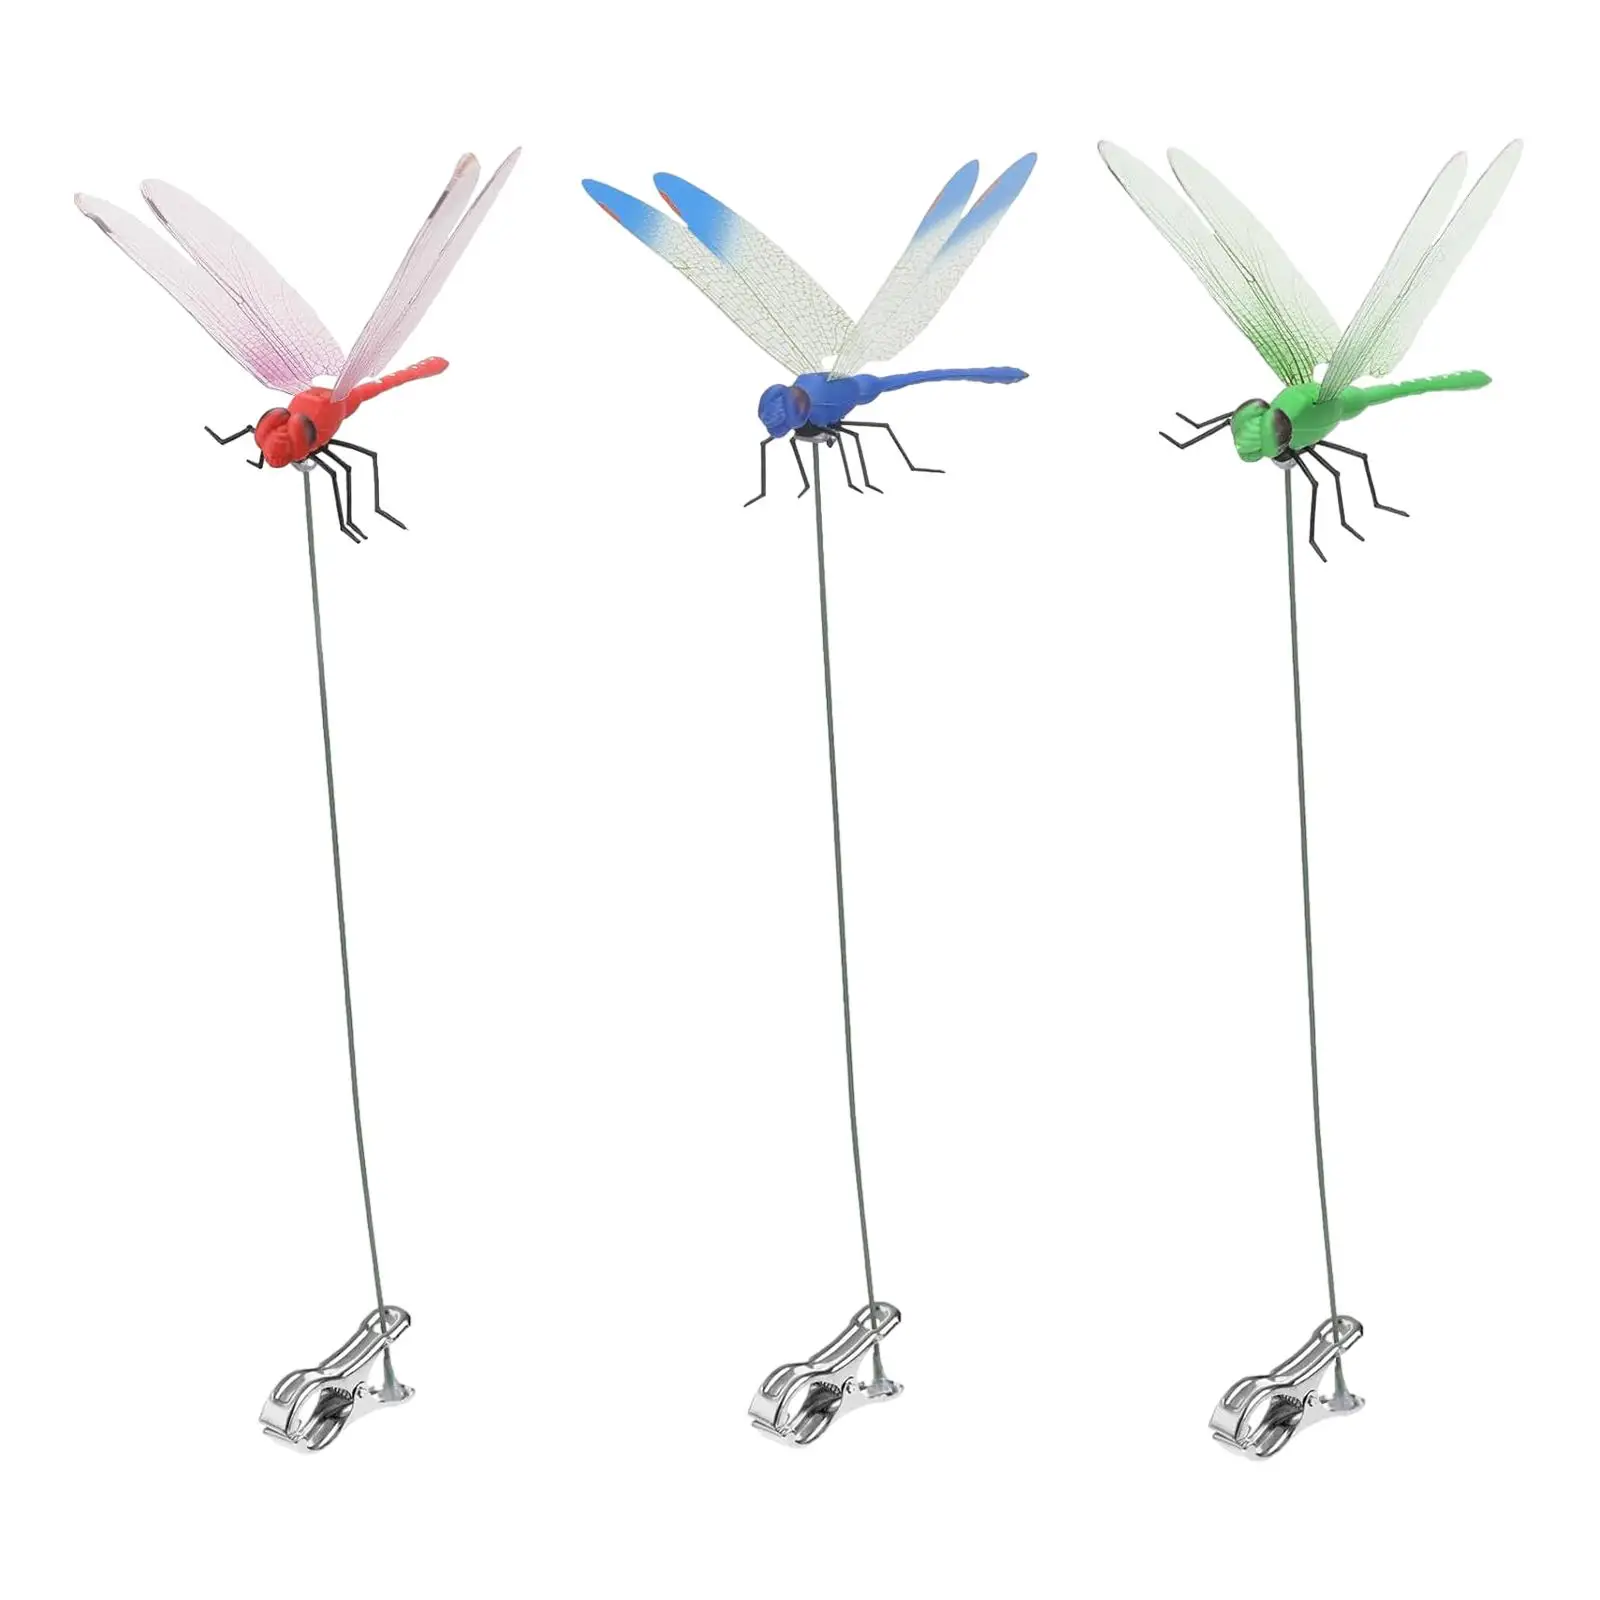 3 Pieces Artificial Dragonfly Stakes Creative Resin Simulation Dragonfly Stakes for Lawn Decor Planter Outdoor Patio Garden